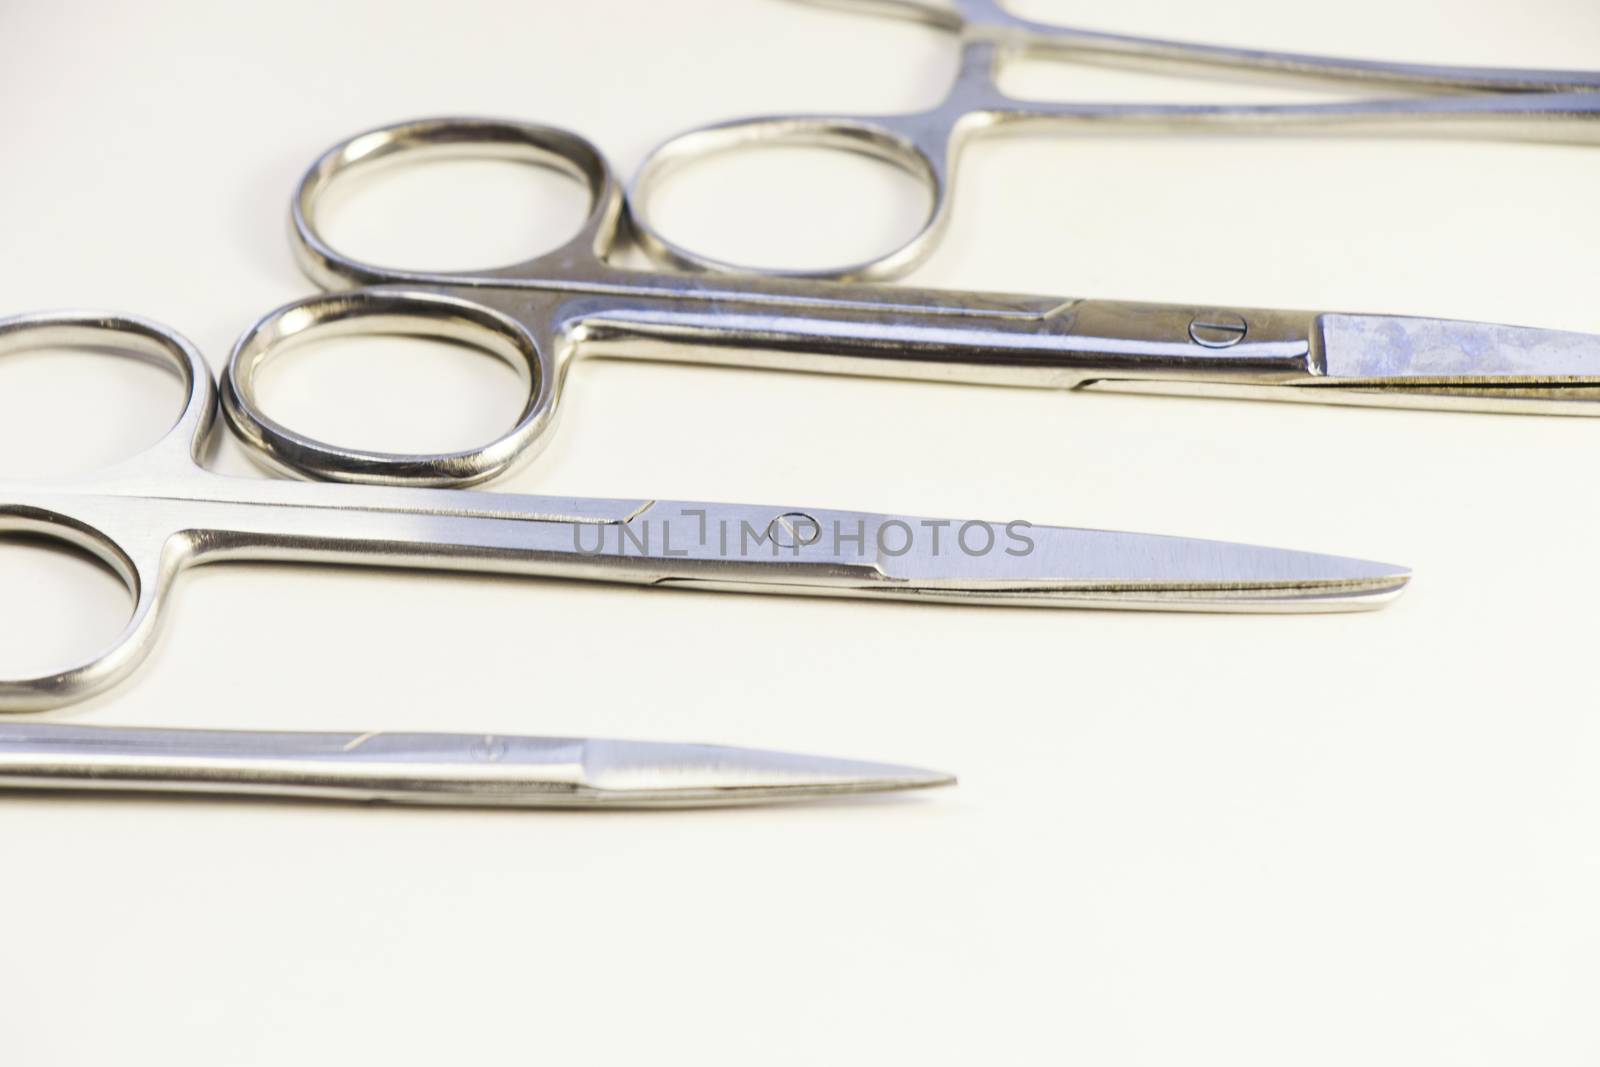 Dissection Kit - Premium Quality Stainless Steel Tools for Medical Students of Anatomy. Surgery instruments. Operation scissors. by Taidundua